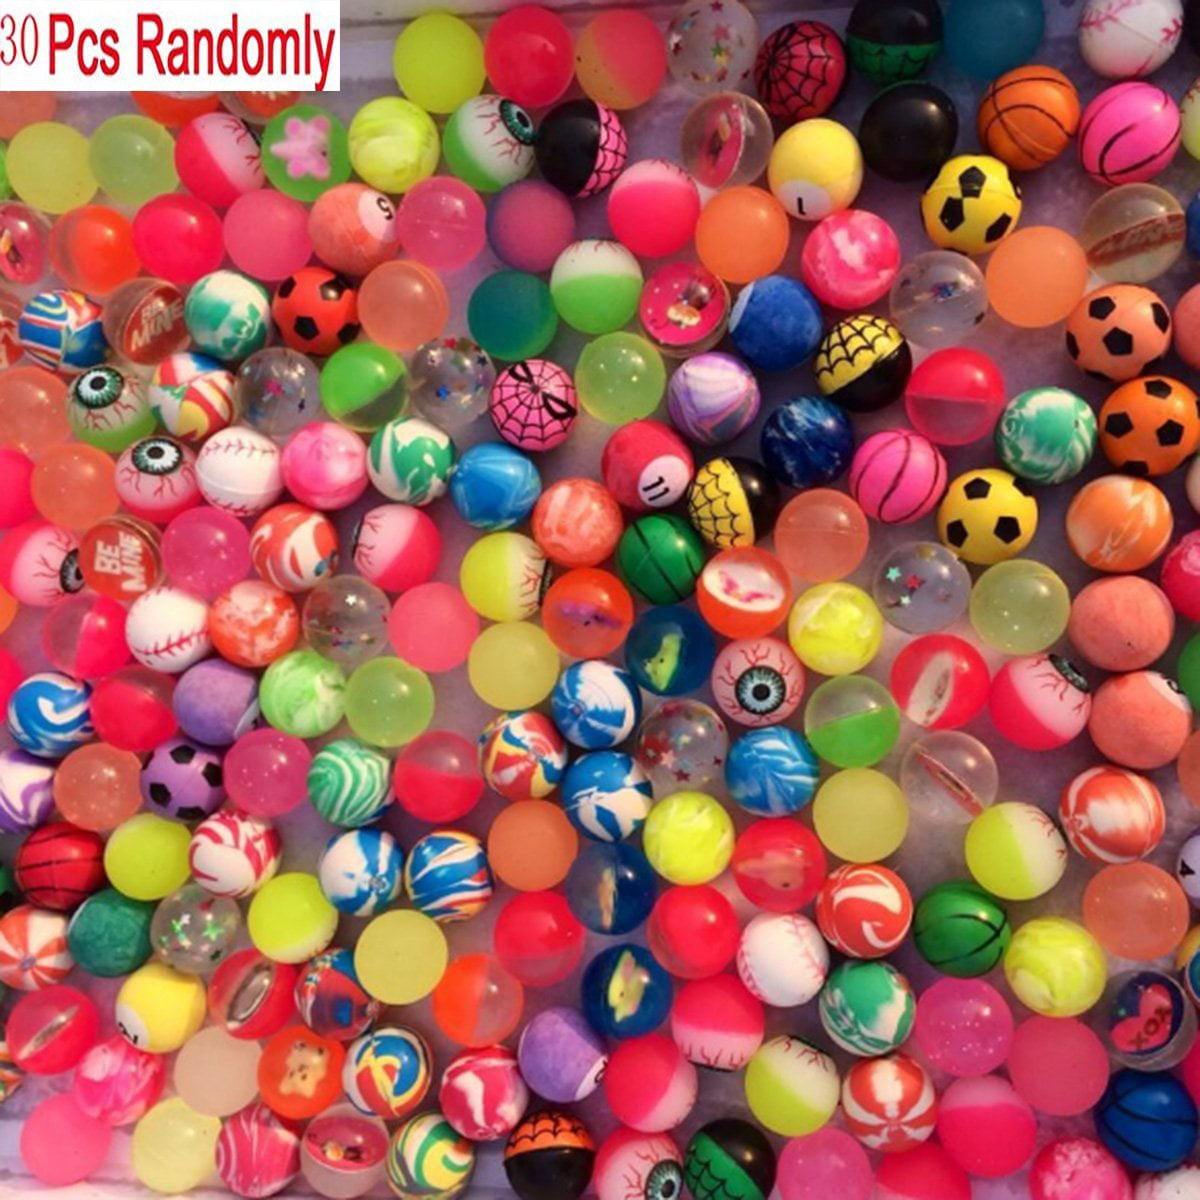 Party Favors Assorted Colorful Neon Mixed Pattern Designs for Kids Playtime Prizes 1.25 Inches 20 Pcs Bouncing Bouncy Balls Bulk Set Birthdays & More